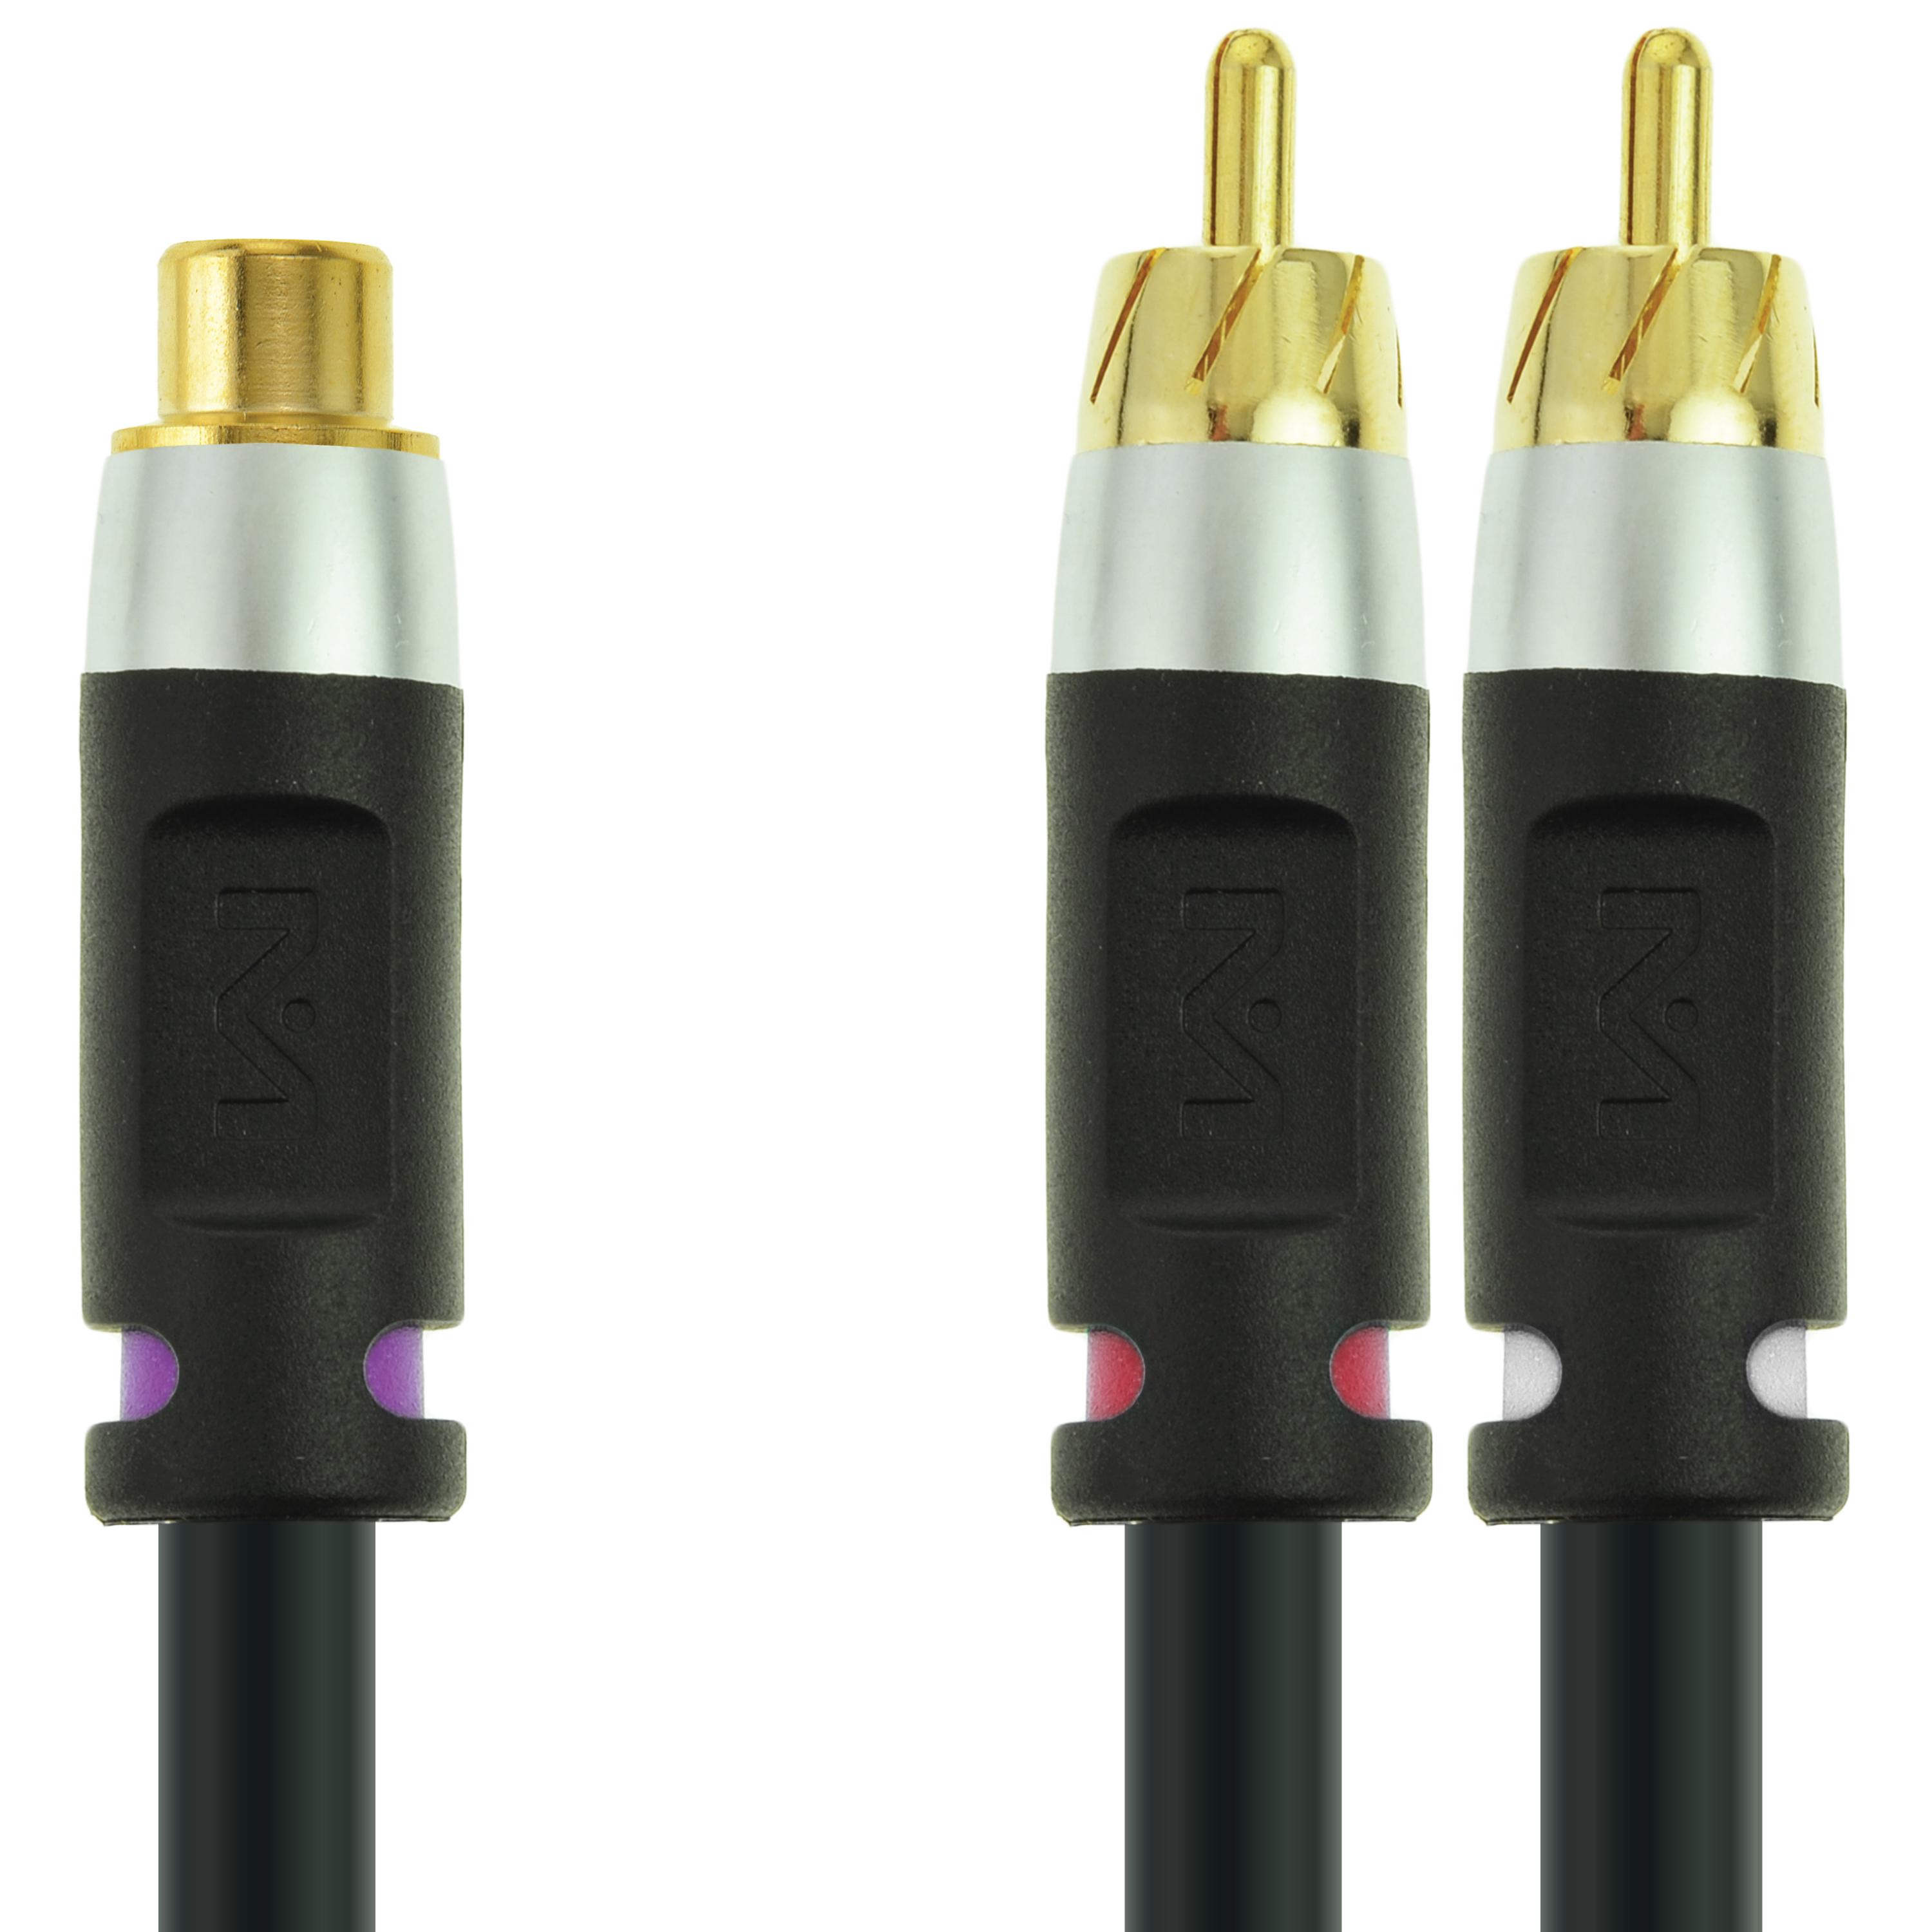 - Dual Shielded with Gold Plated RCA to RCA Connectors Black Mediabridge ULTRA Series Subwoofer Cable 15 Foot 